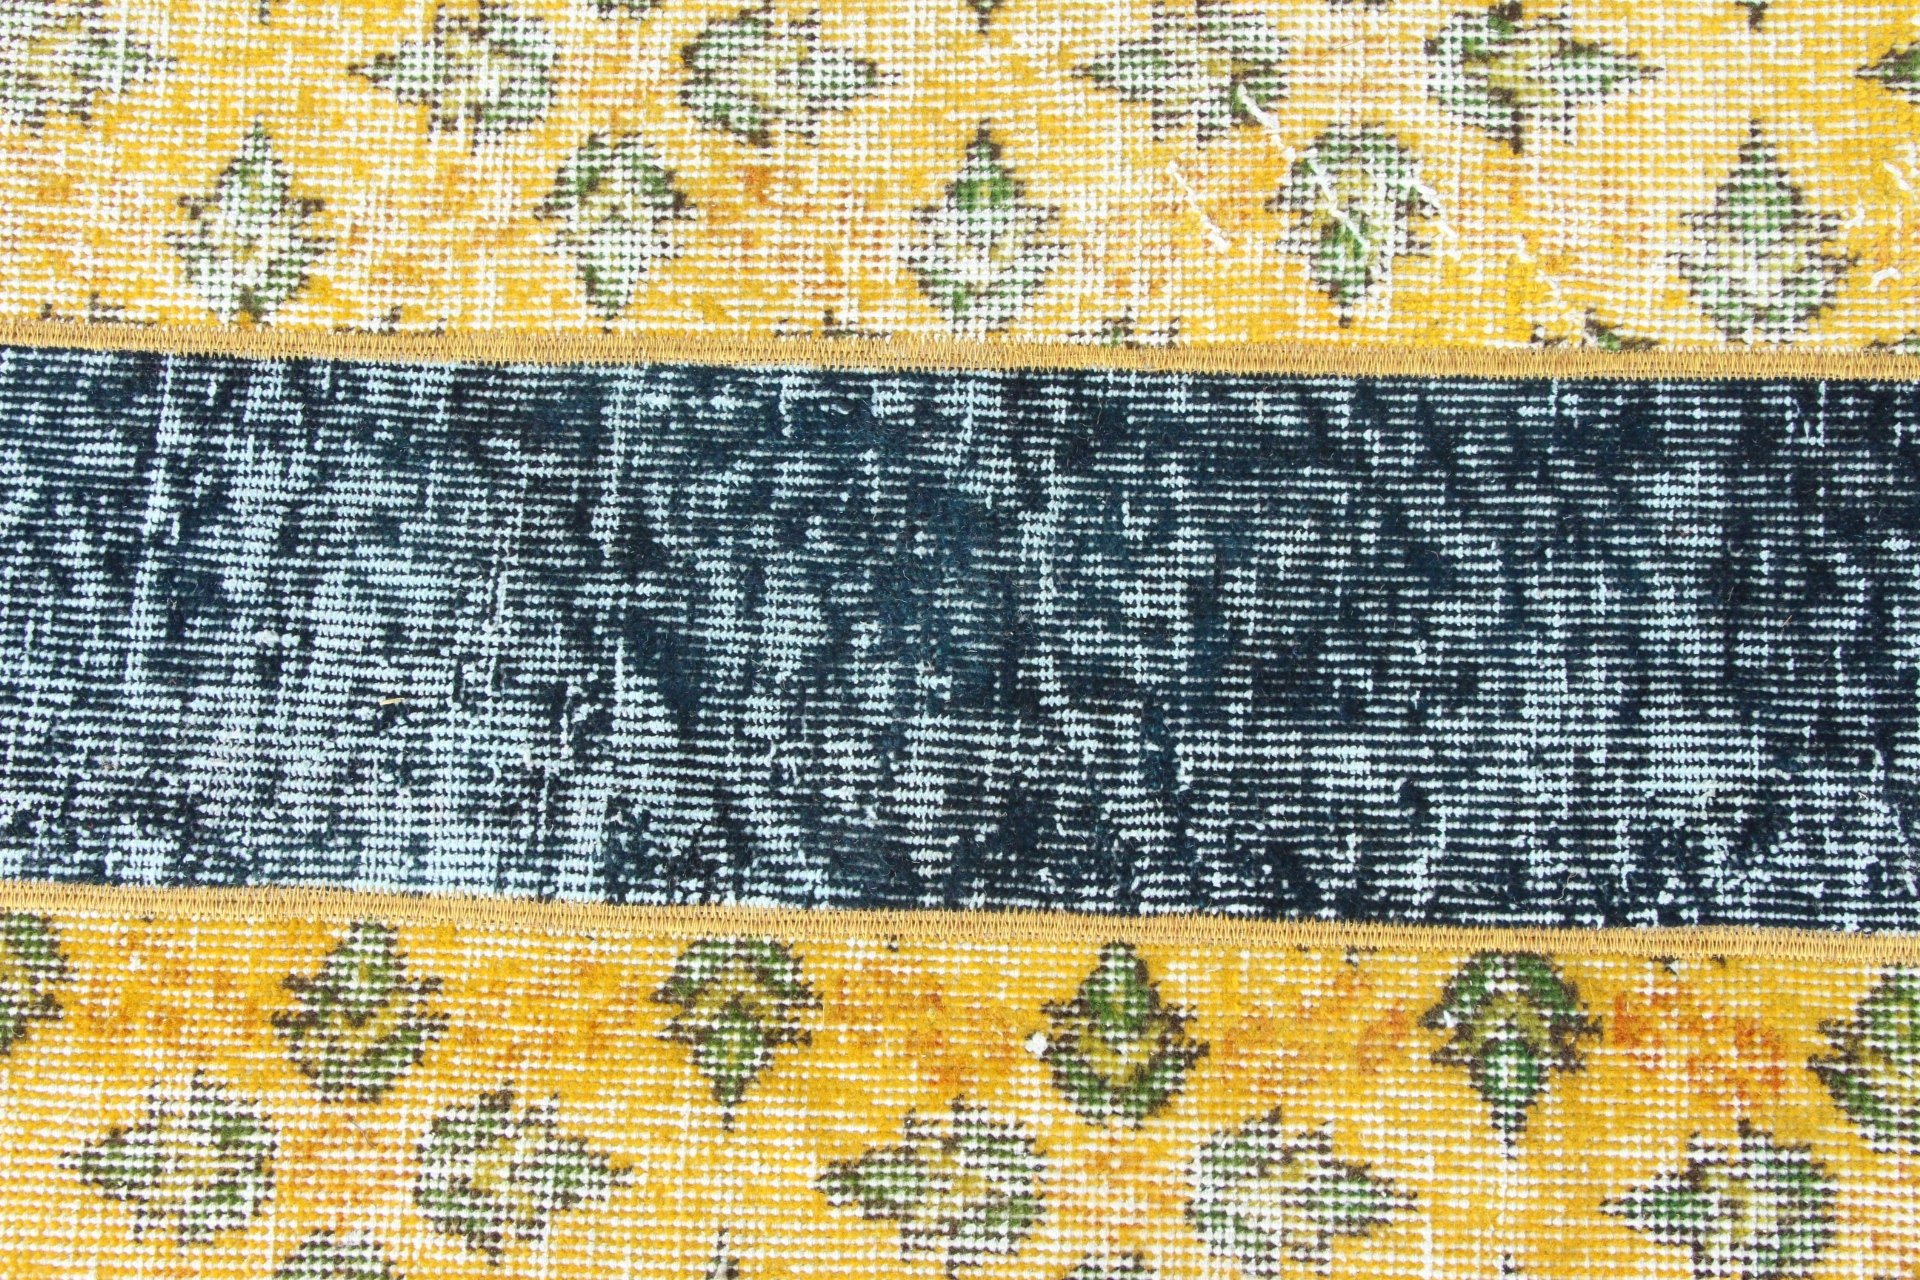 Antique Rugs, Turkish Rugs, Vintage Rugs, Entry Rug, Yellow Home Decor Rugs, Anatolian Rugs, Retro Rug, Bedroom Rugs, 1.8x2.7 ft Small Rugs